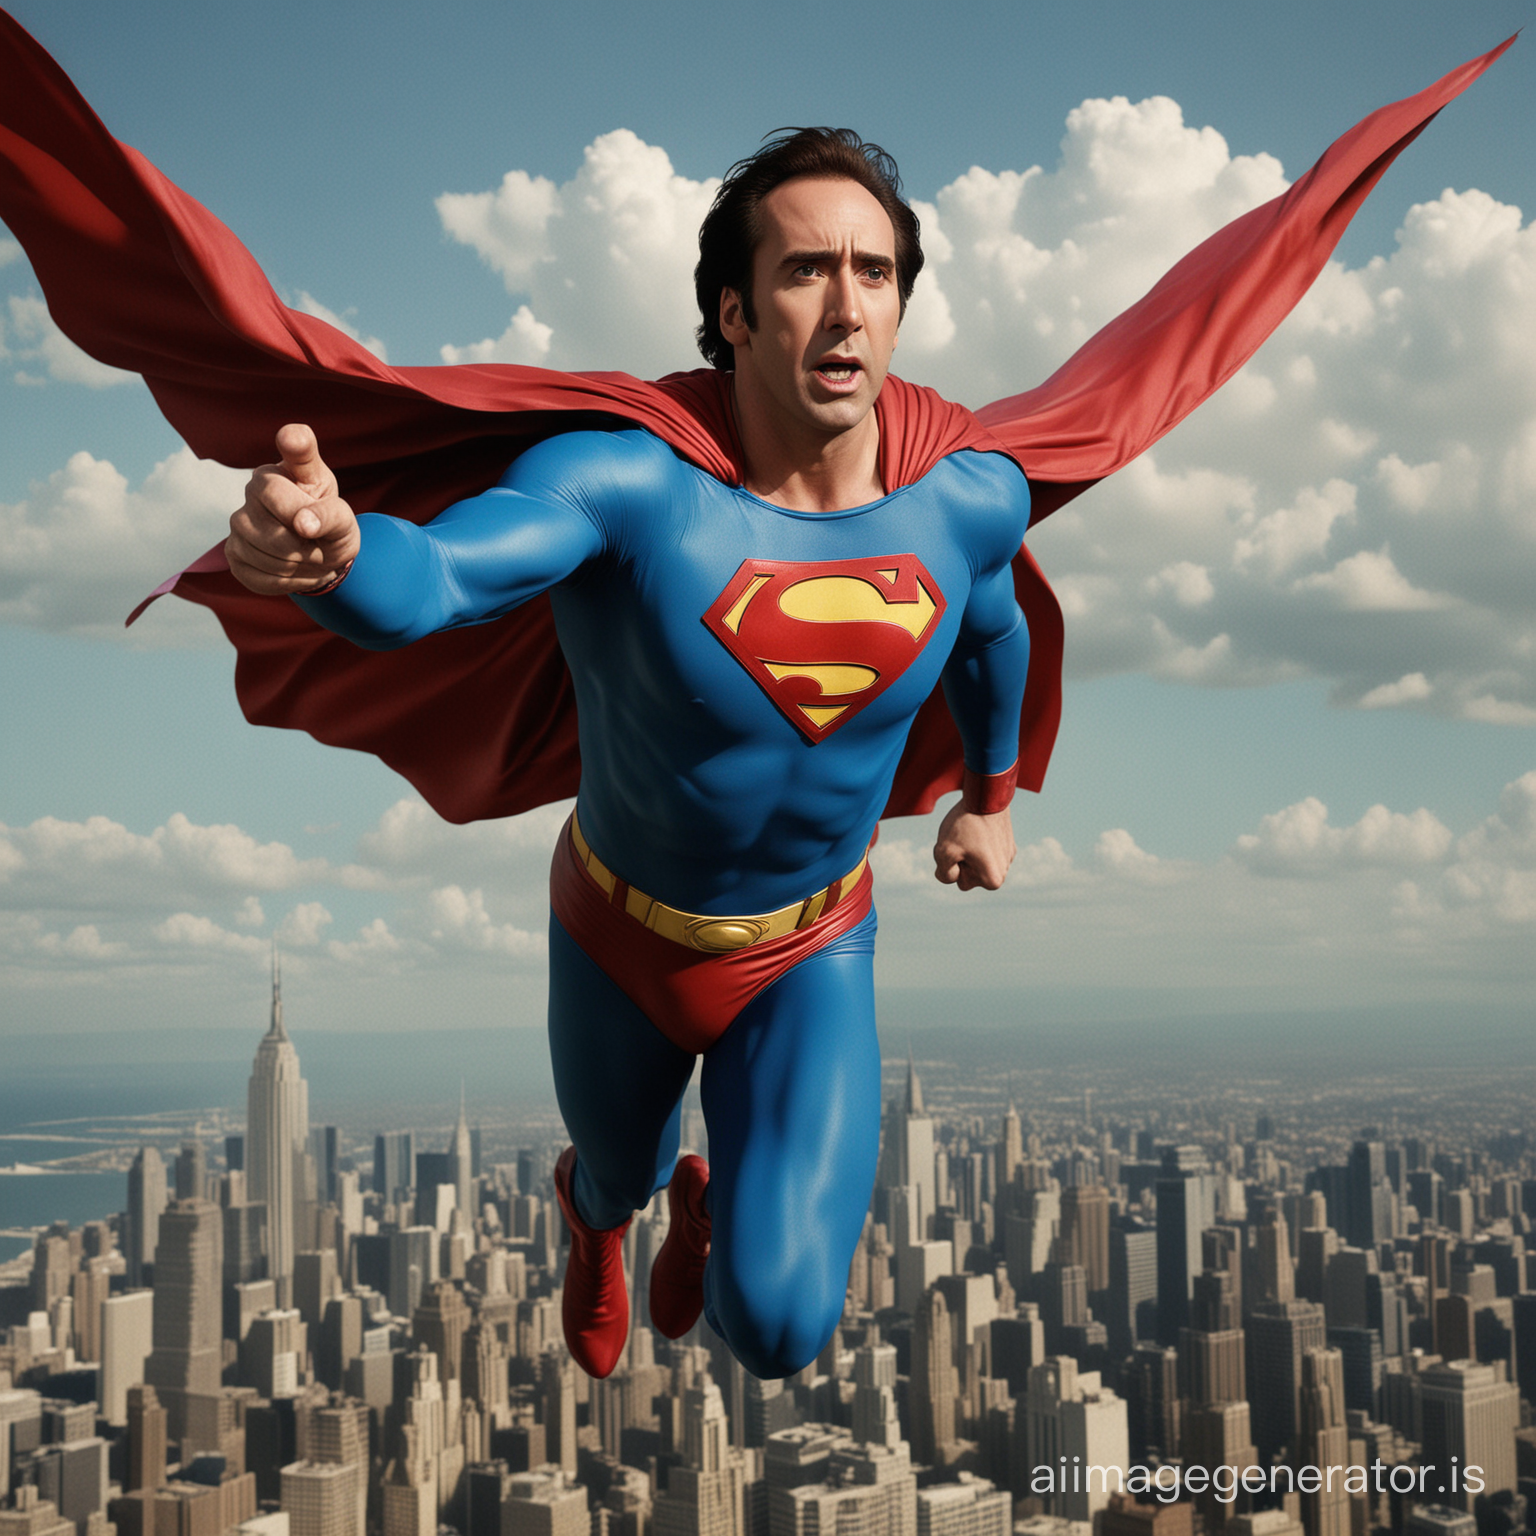 Nicolas Cage as Superman in a movie directed by Tim Burton. Nicolas Cage. Superman flying. 80s movie. Realistic picture.